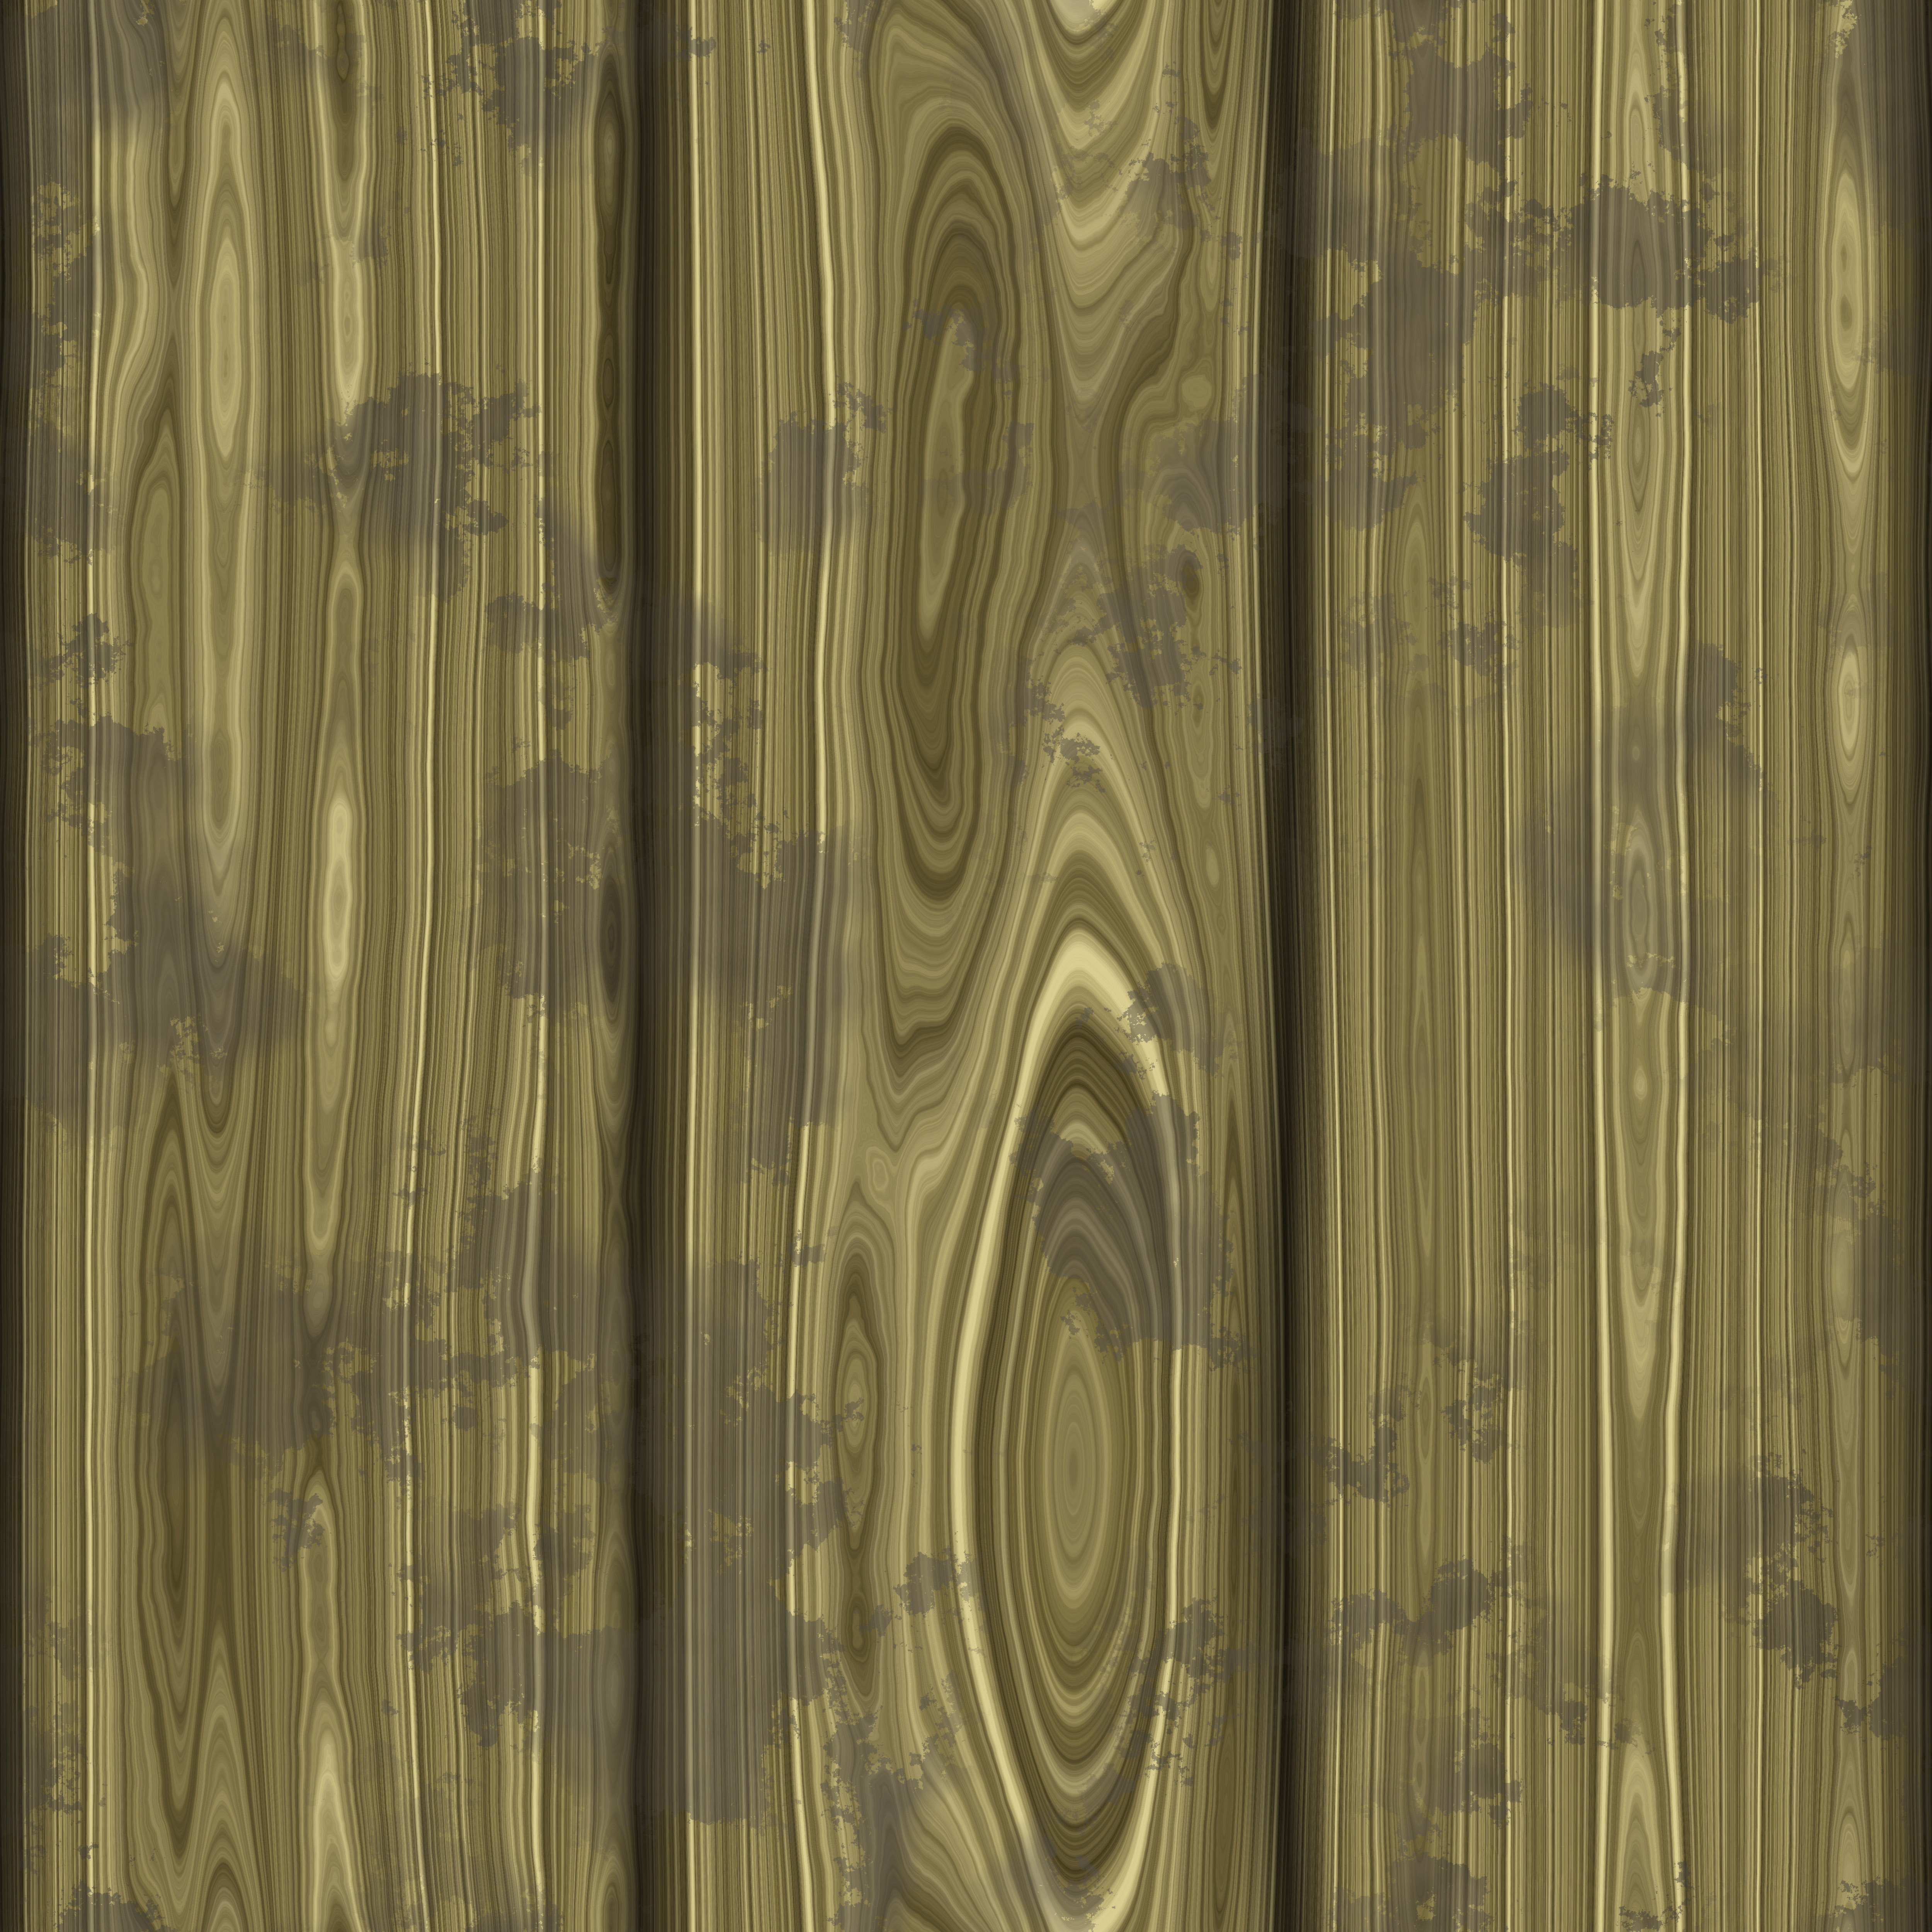 old greenish wood panel image of a wooden background | www